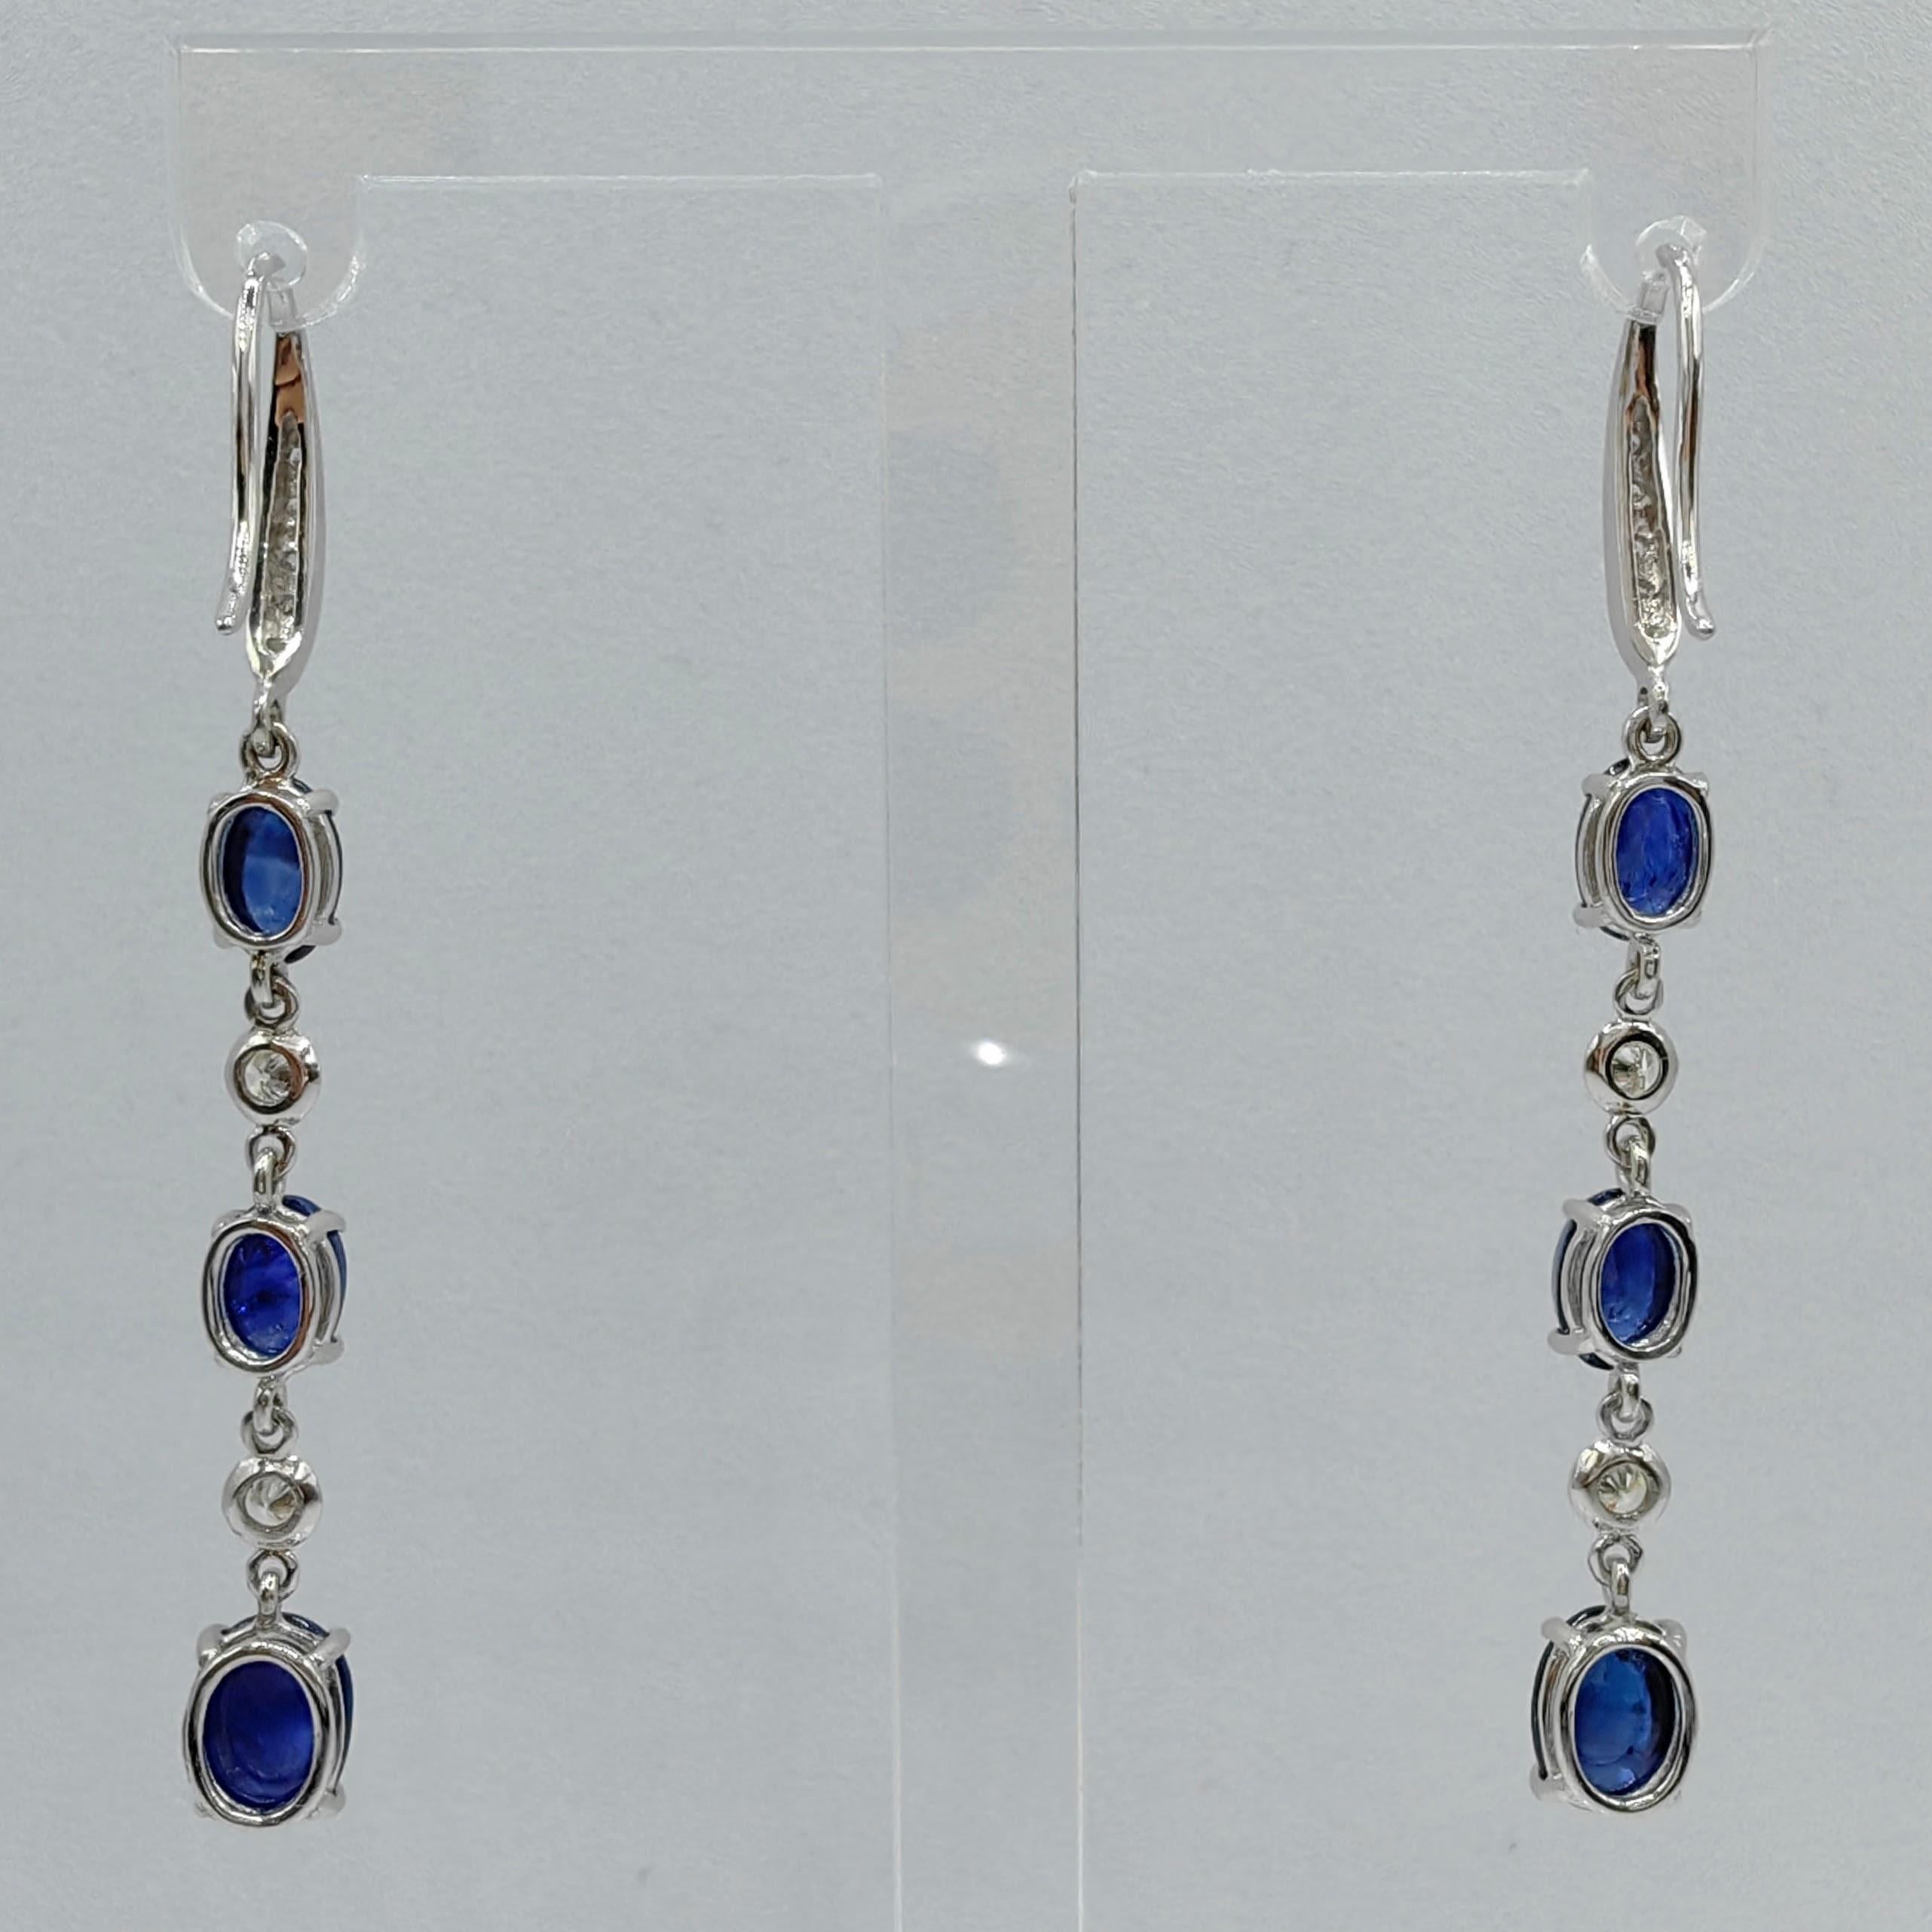 5.22ct Royal Blue Cabochon Sapphire Diamond Dangling Earrings in 18K White Gold In New Condition For Sale In Wan Chai District, HK